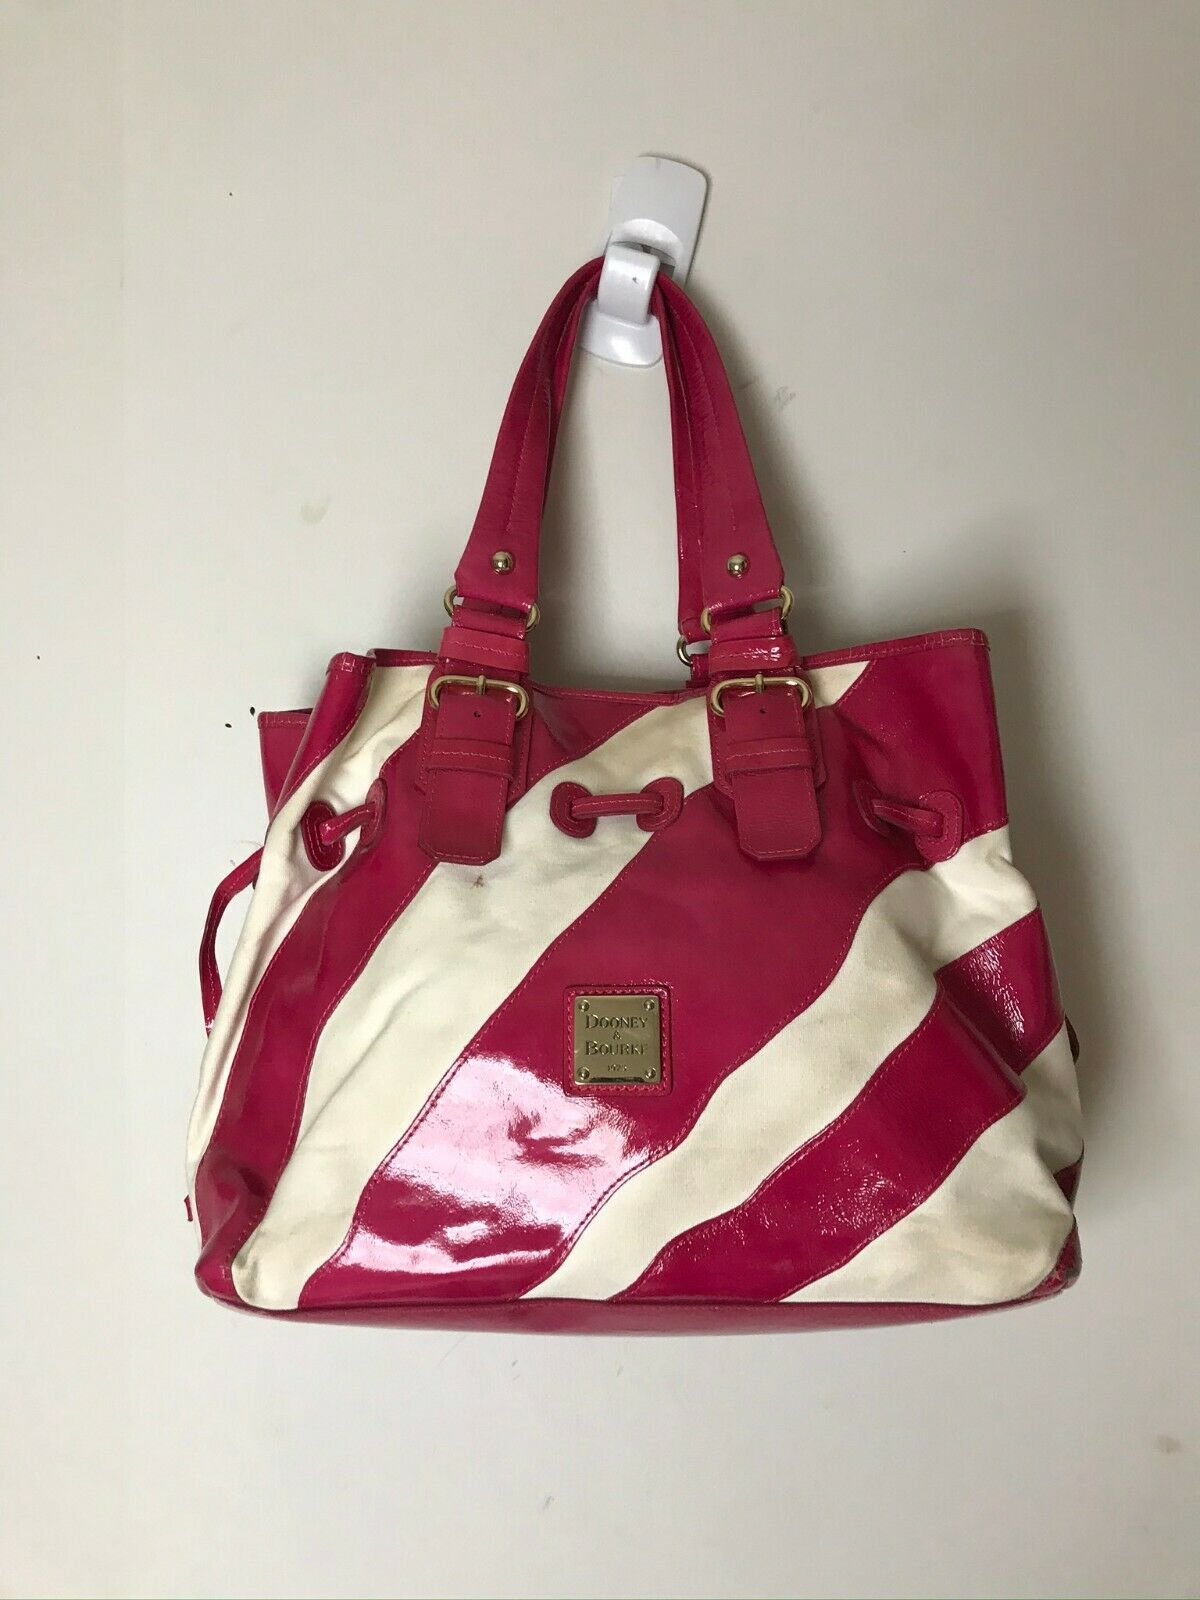 Dooney & Bourke Red/White Large Tote Bag